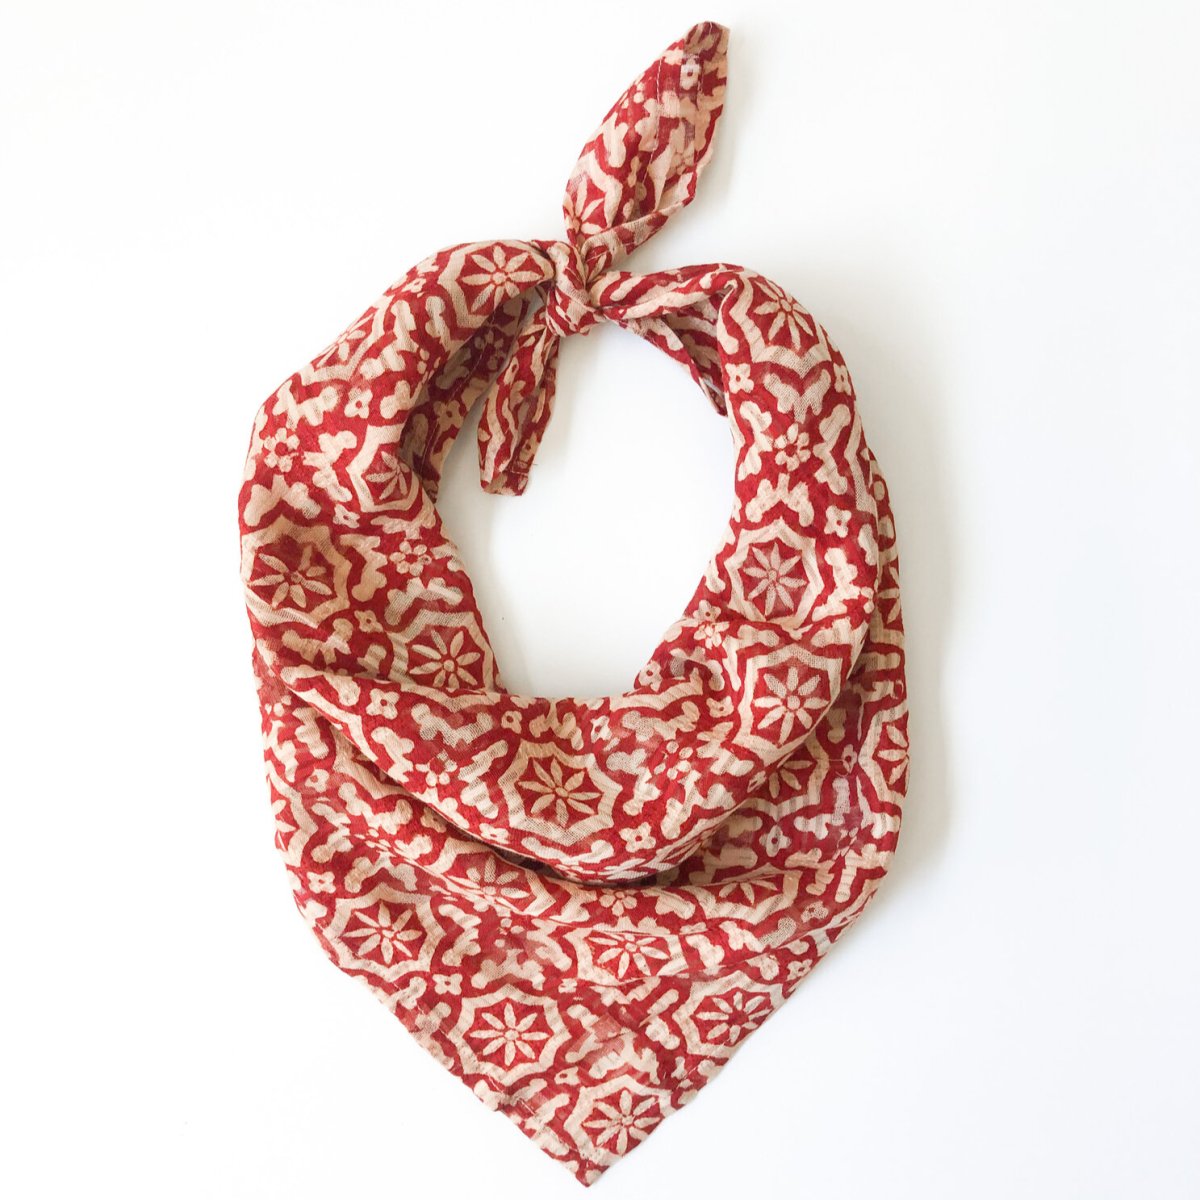 A red and cream patterned bandana, folded over and tied in a knot. Block printed by hand, the Fez Bandana from Maelu is designed in Portland, Oregon and handmade in India.